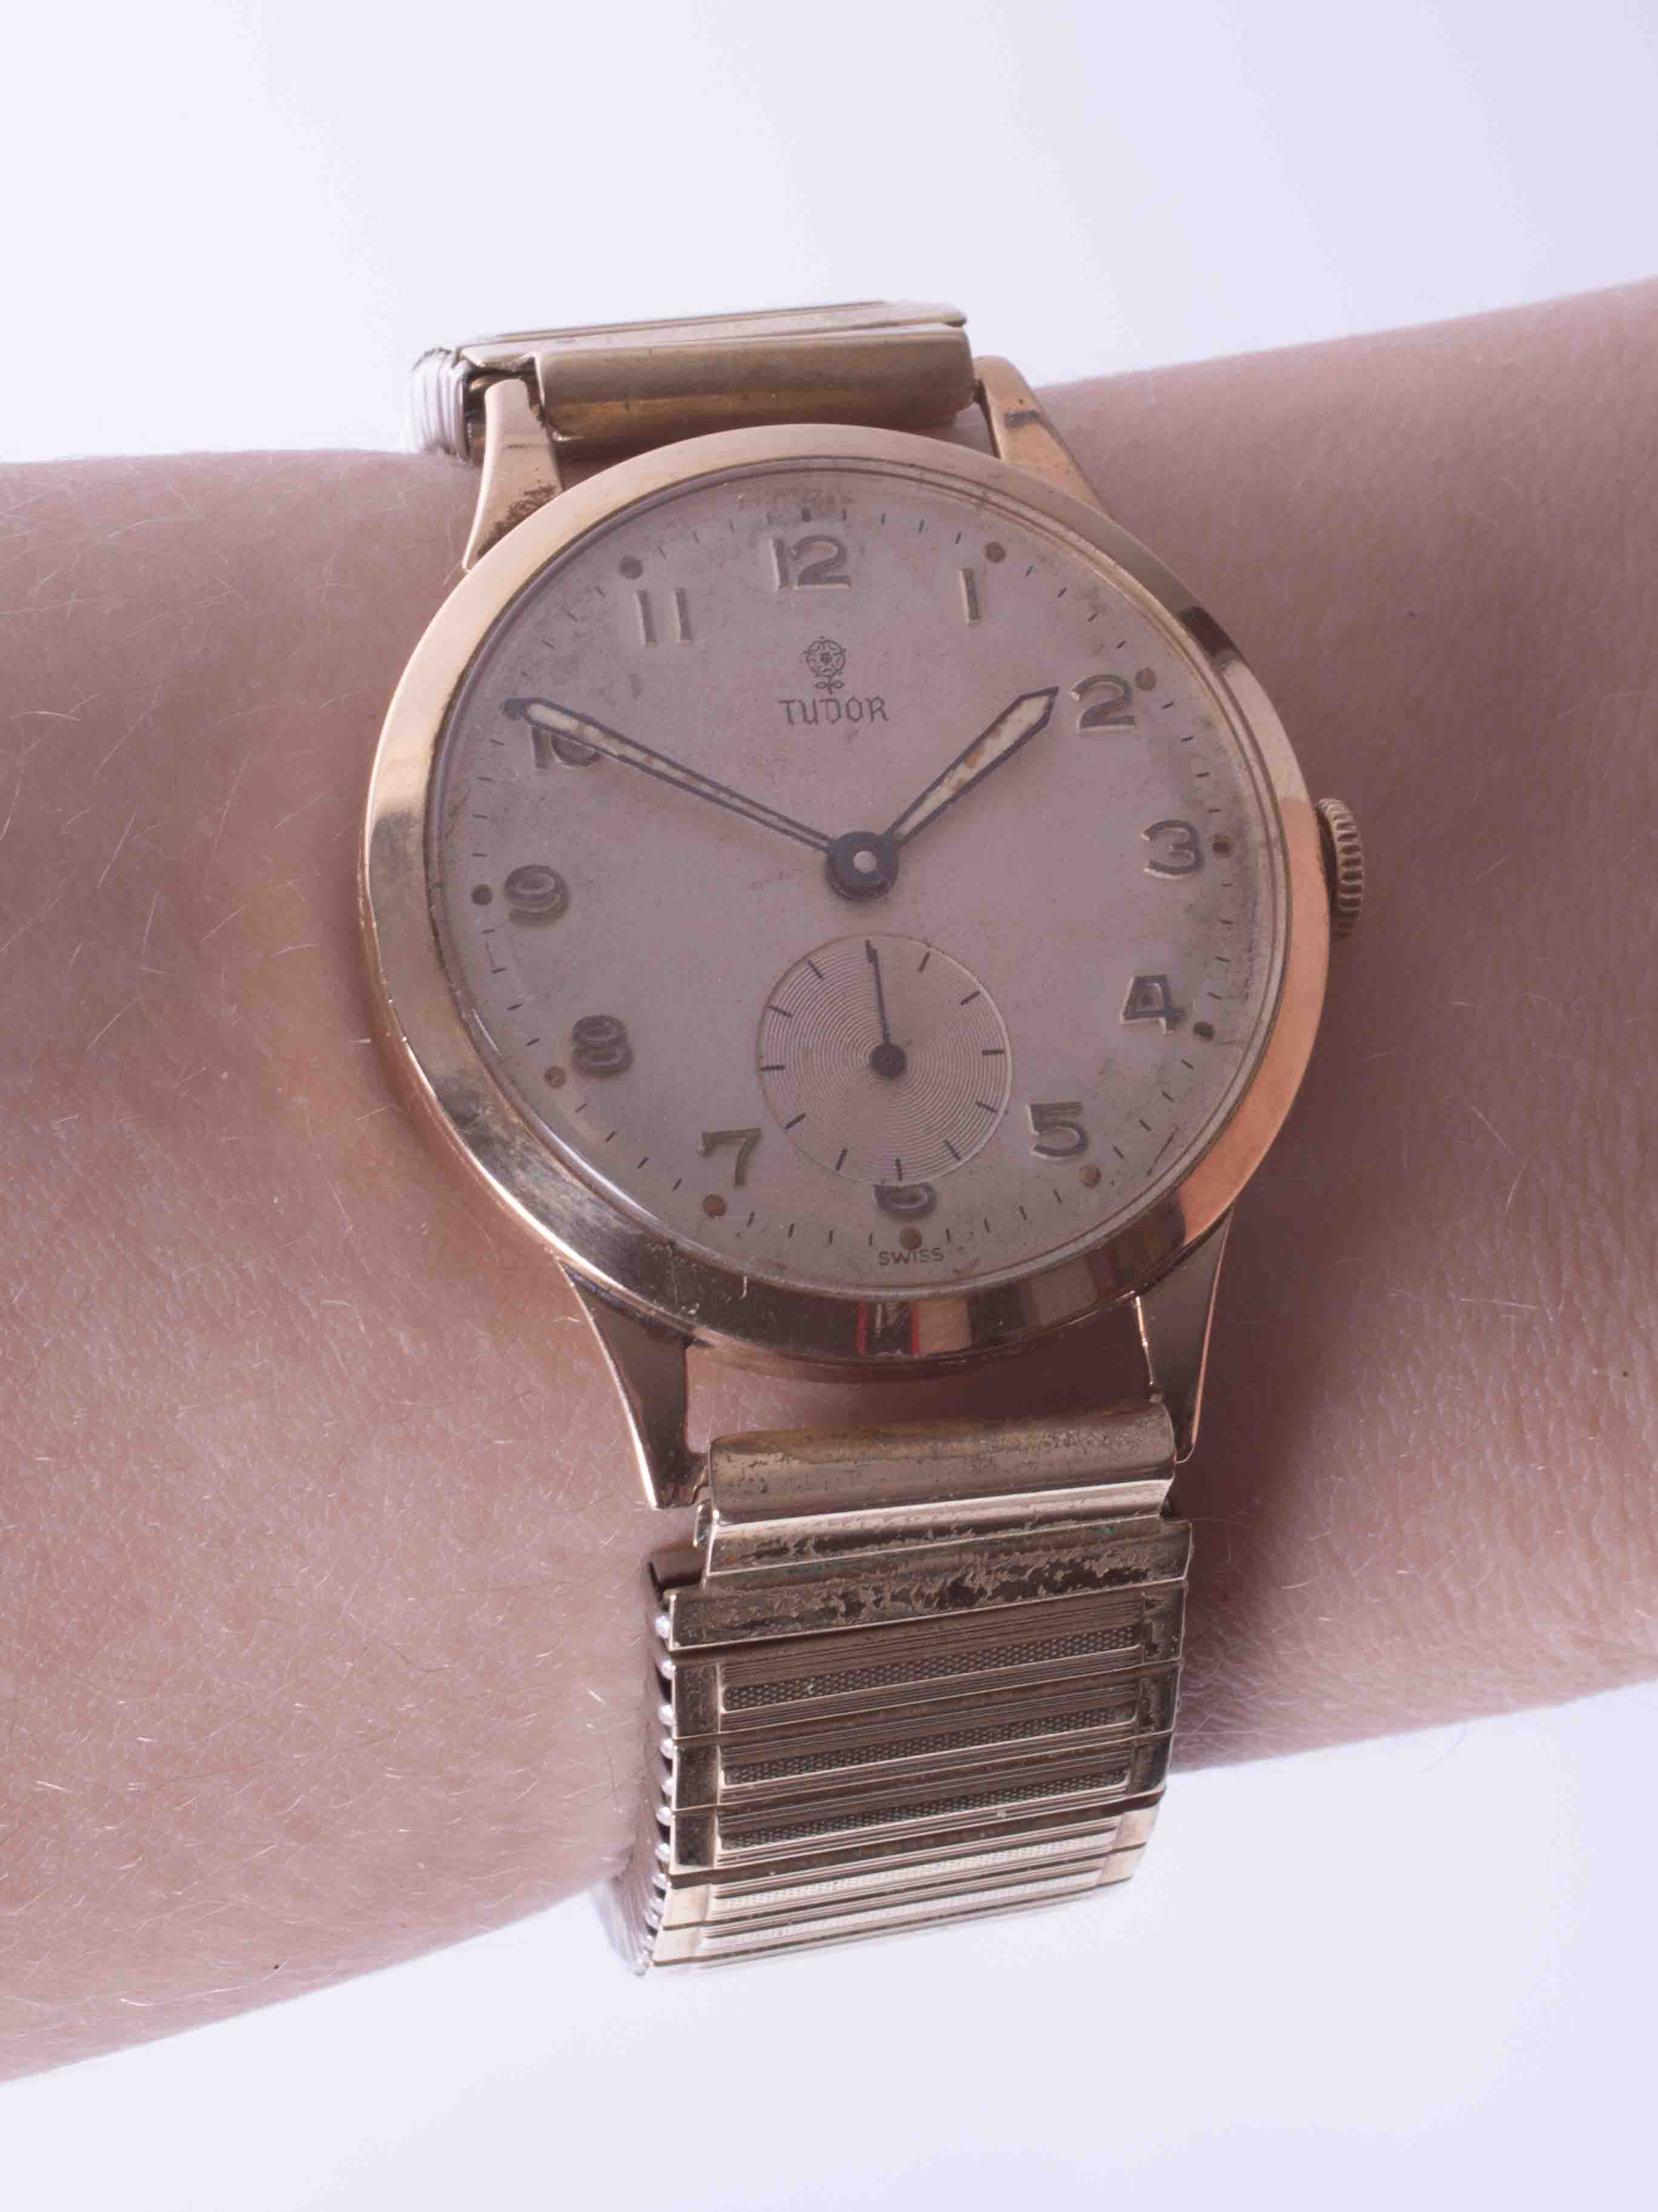 Tudor, a 9ct manual wind wristwatch circa 1965, the dial with Arabic numerals and sub-second dial, - Image 5 of 5